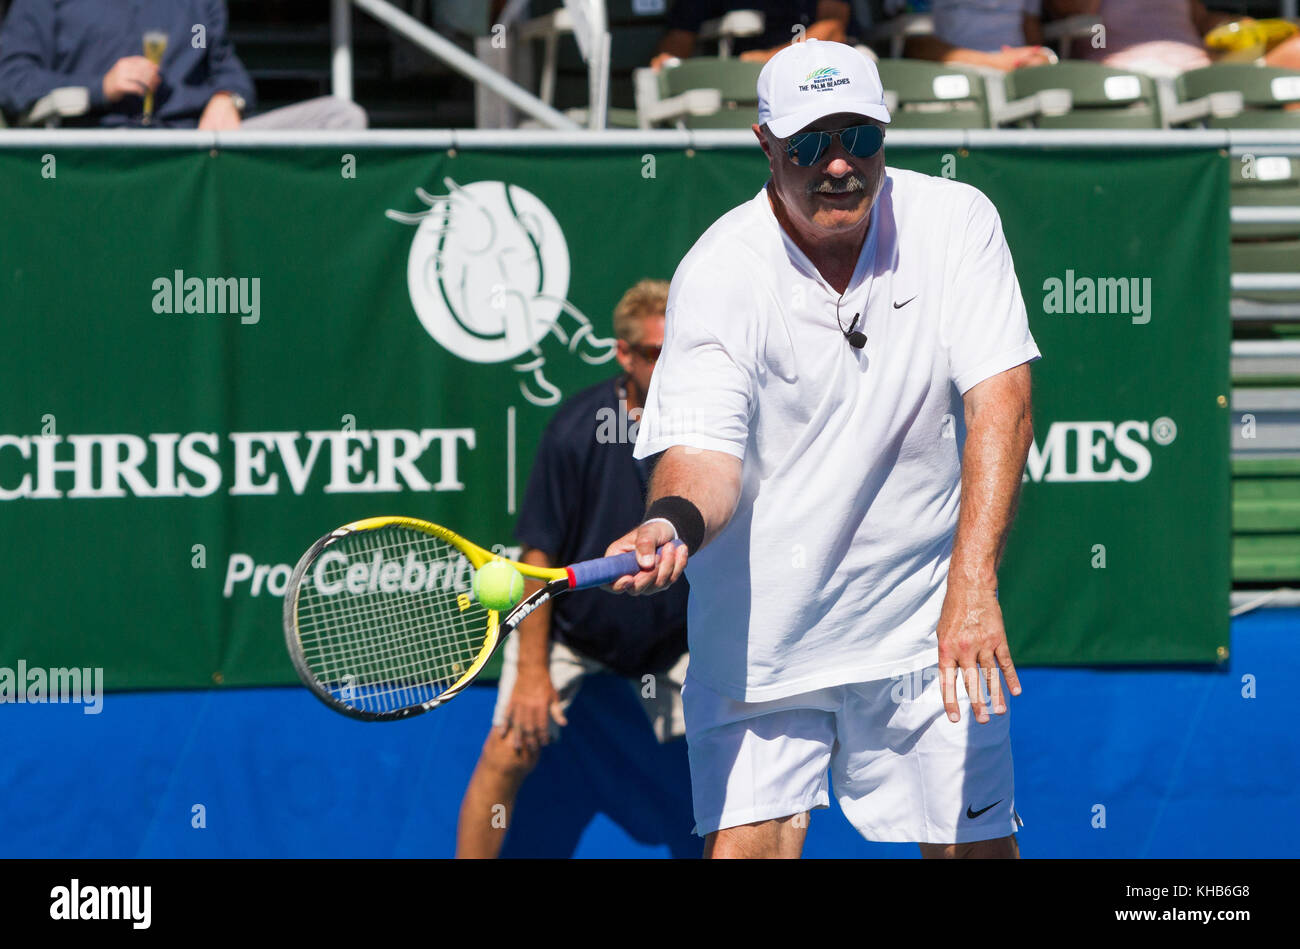 Delray Beach, FL, USA. 5th Nov, 2017. Dr. Phil McGraw participates in the 28th Annual Chris Evert/Raymond James Pro-Celebrity Tennis Classic at Delray Beach Tennis Center on November 5, 2017 in Delray Beach, Florida. Credit: Mpi140/Media Punch/Alamy Live News Stock Photo